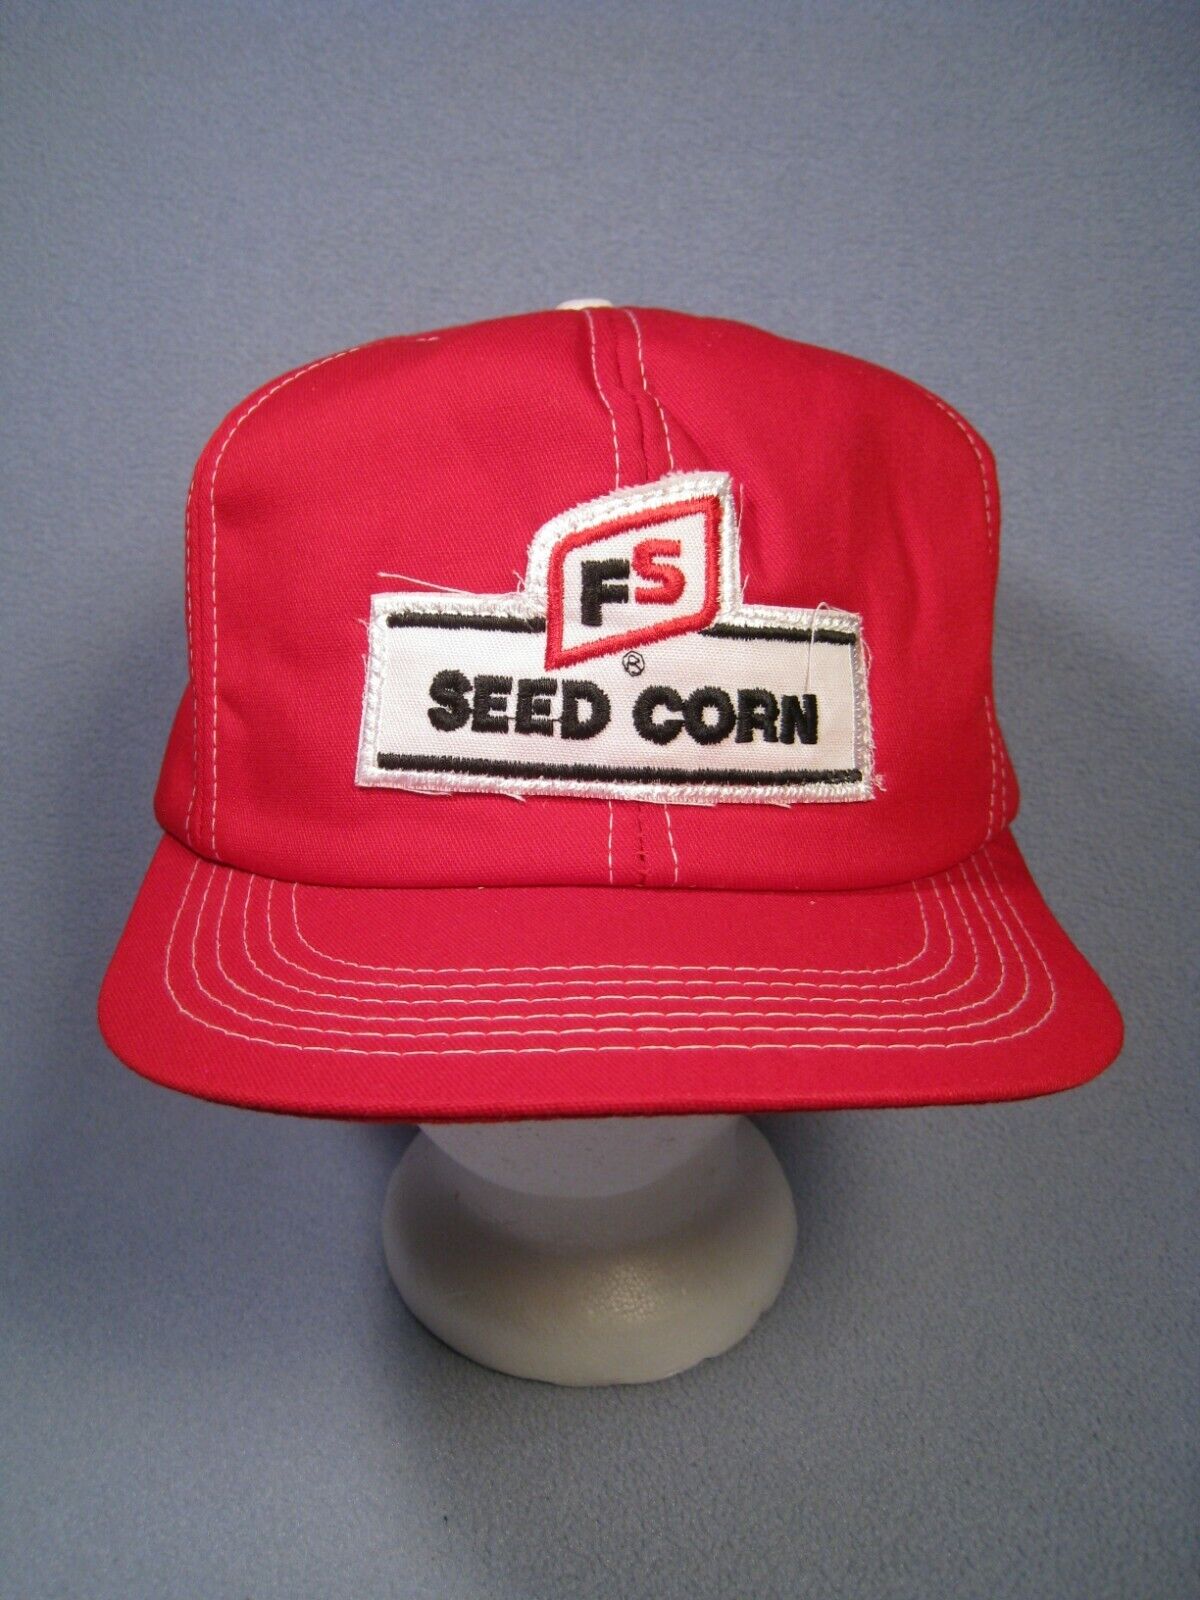 FS Seed Corn Snapback Hat By K Products